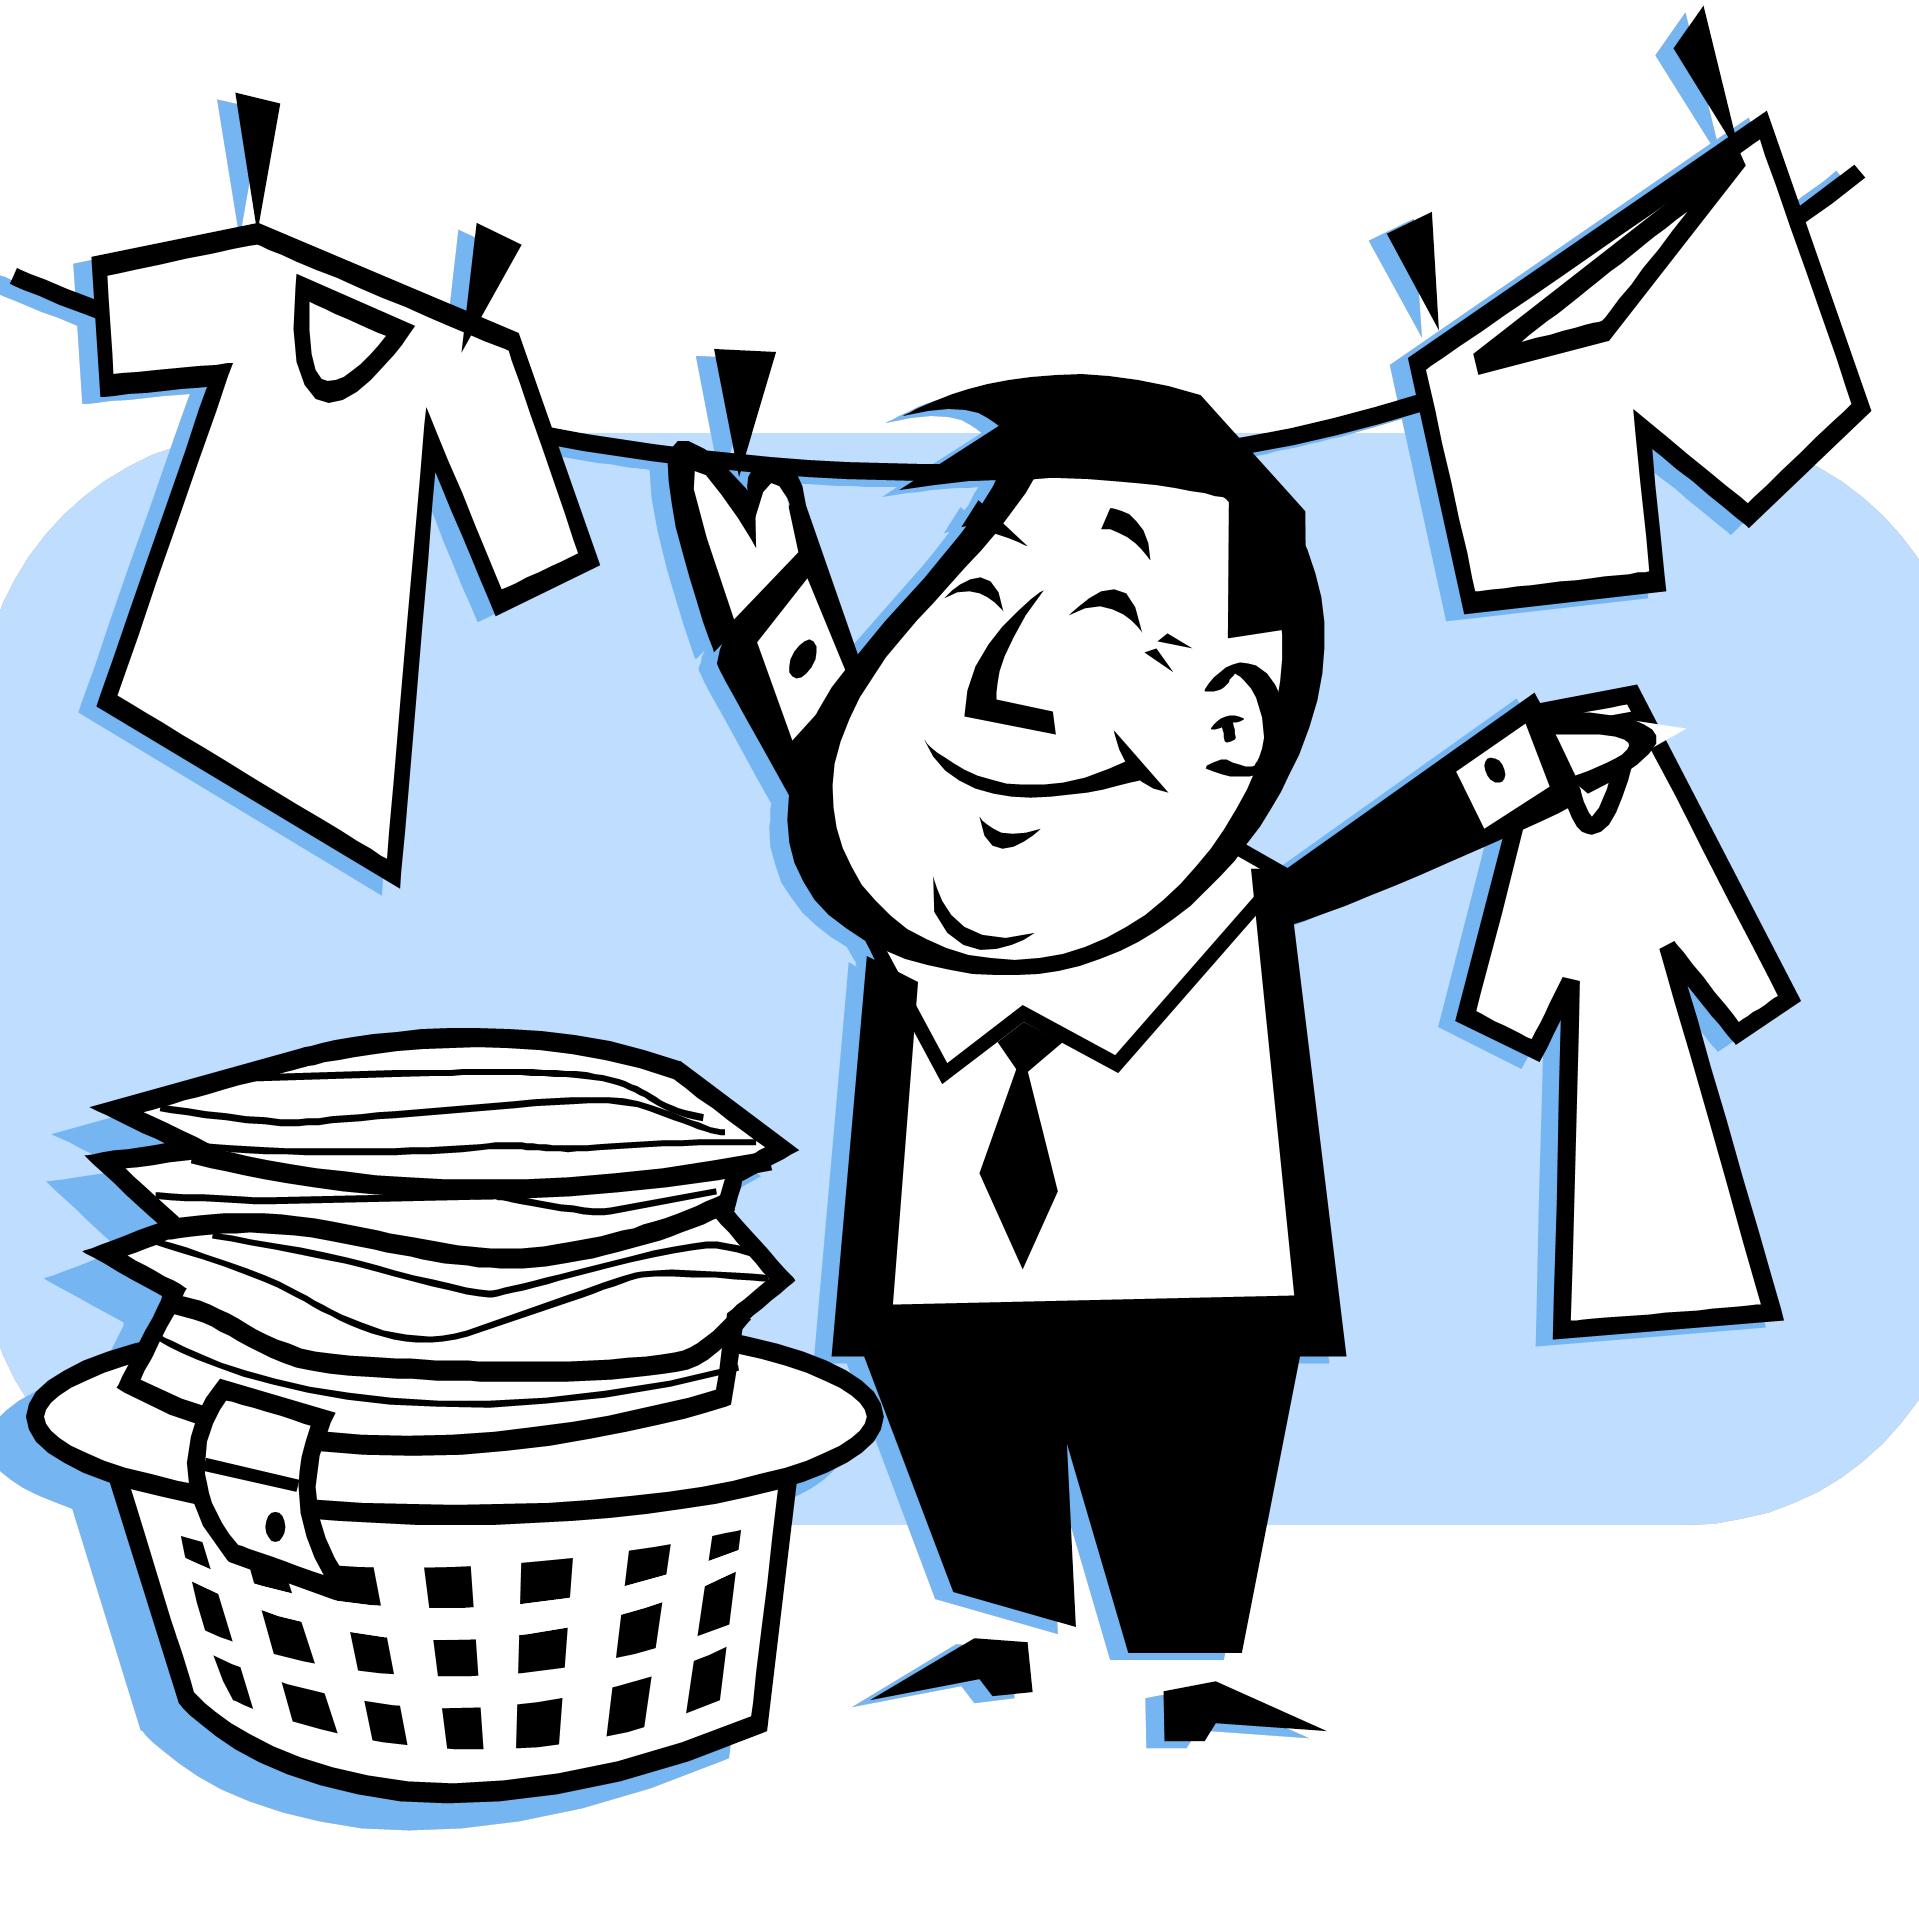 Clip Arts Related To : laundry clipart. view all Pictures Laundry). 